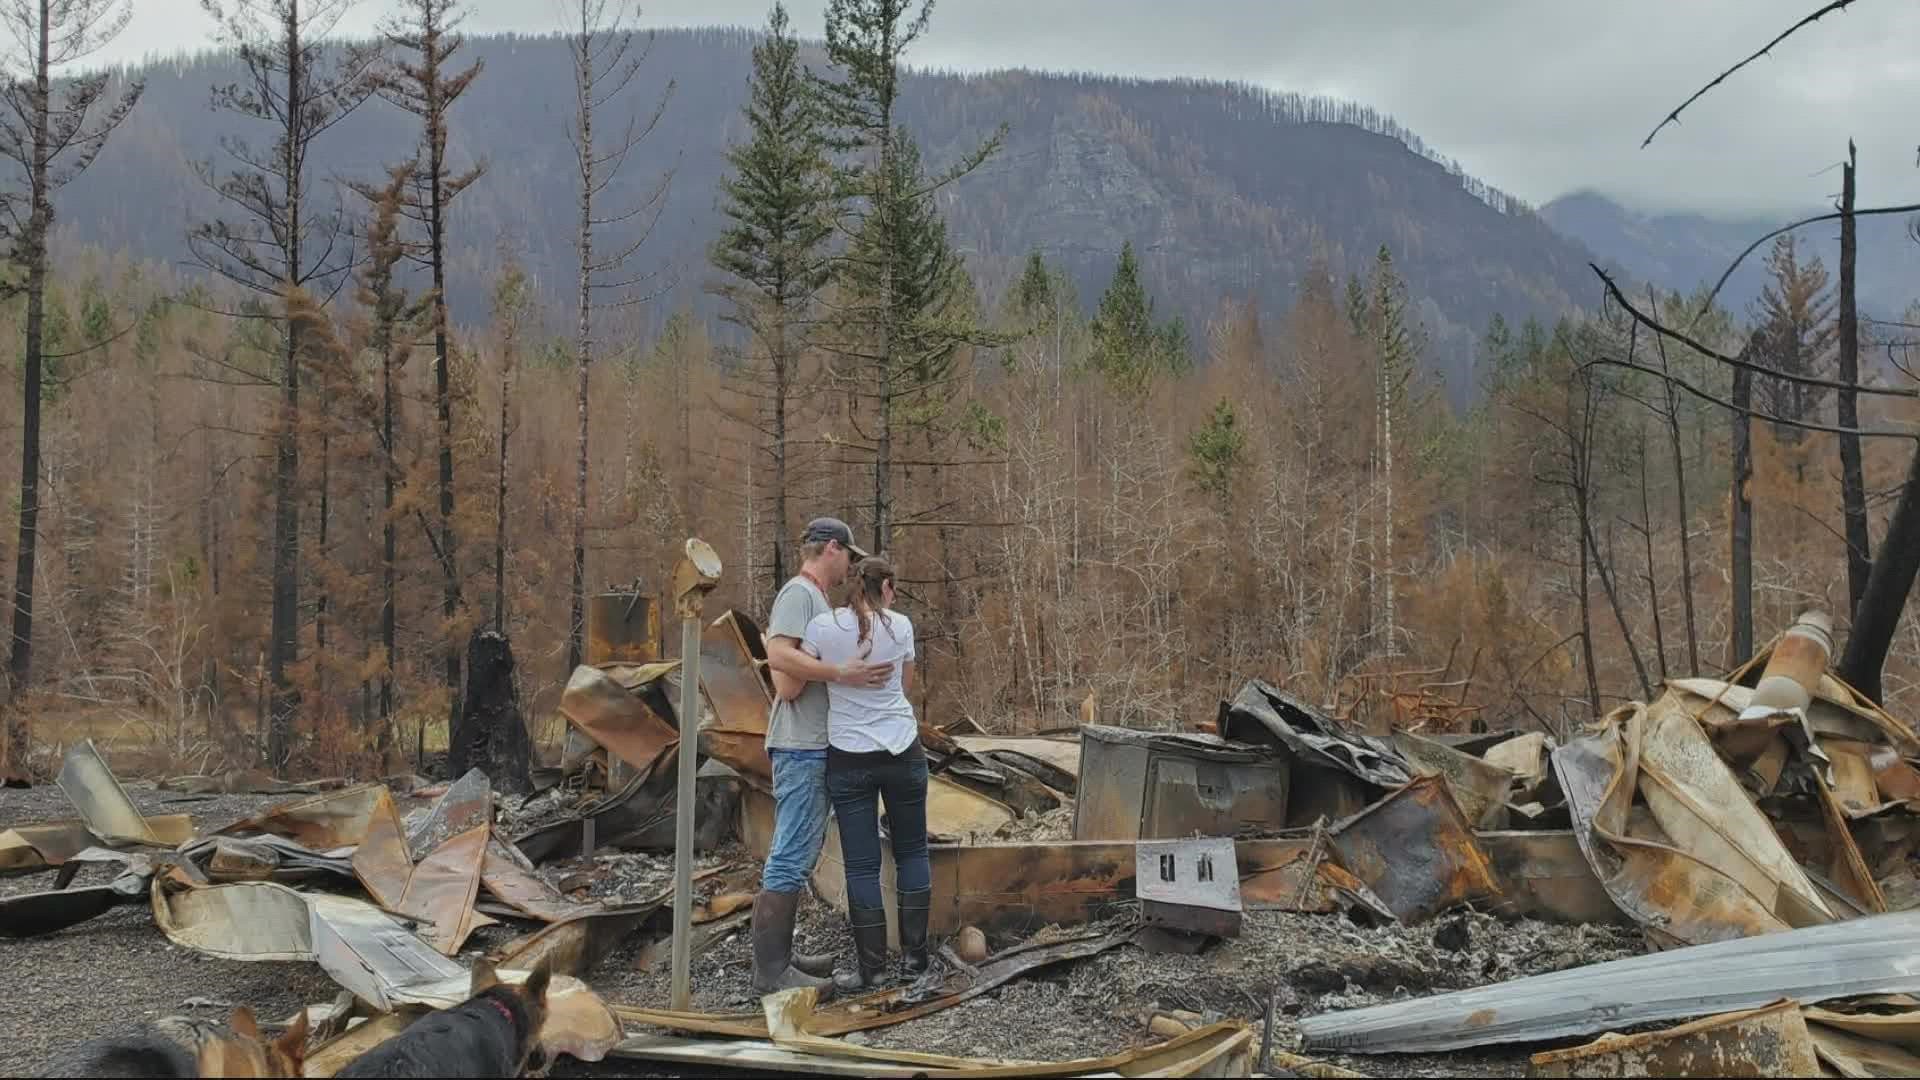 Families in the town of Stayton continue to rebuild one year after the historic wildfires hit Oregon. A support group is helping people heal and make connections.